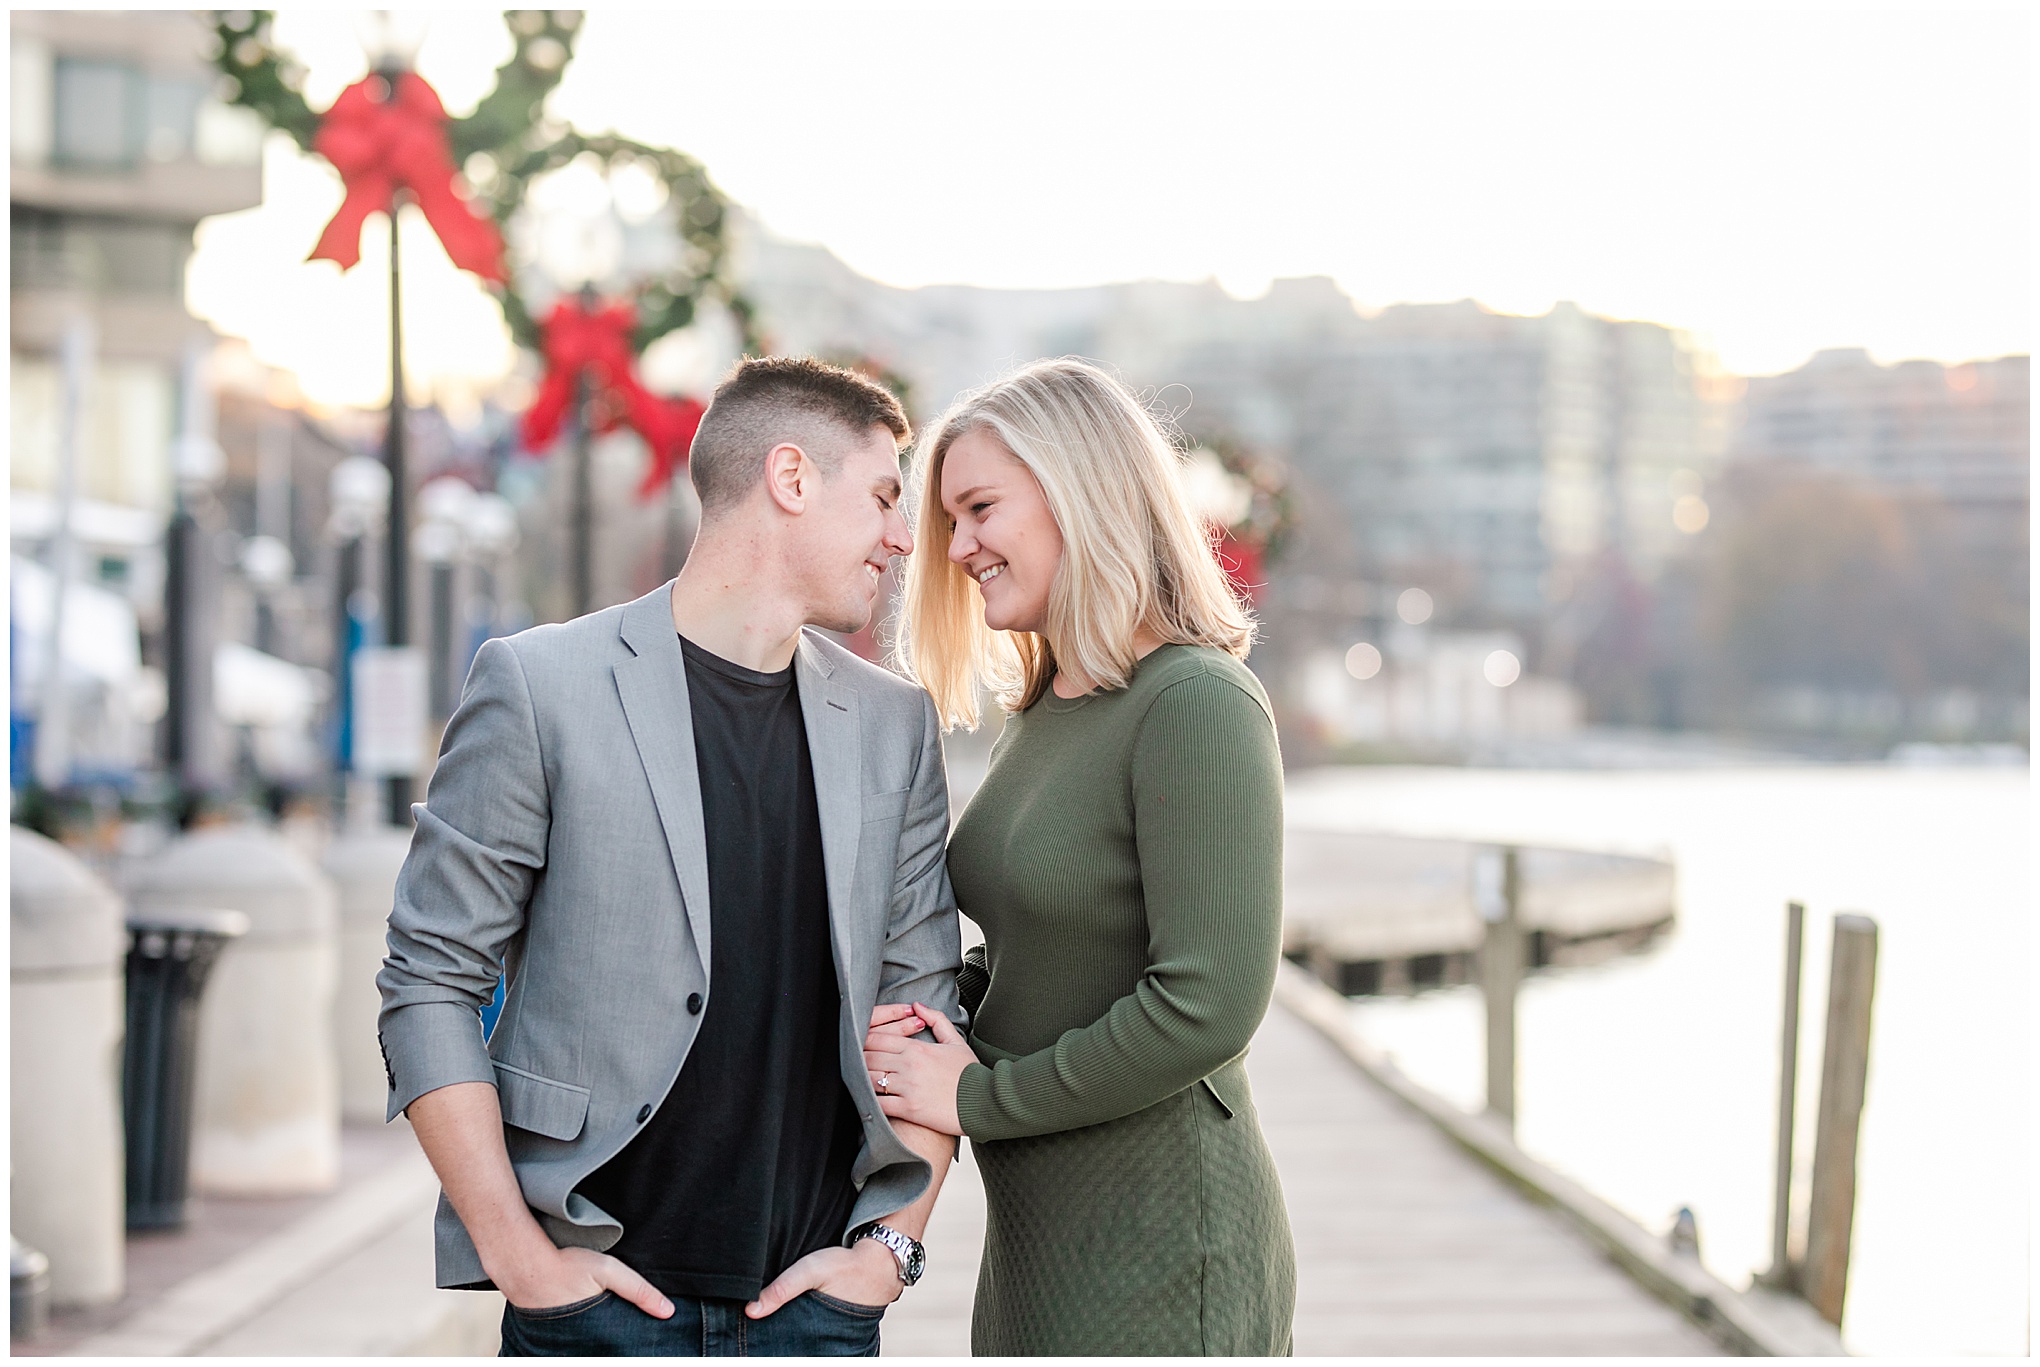 winter Georgetown engagement photos, Georgetown DC, Washington DC engagement photos, DC portraits, DC engagement photographer, DC wedding photographer, DC photographer, winter portraits, Rachel E.H. Photography, morning magic hour, holiday wreaths